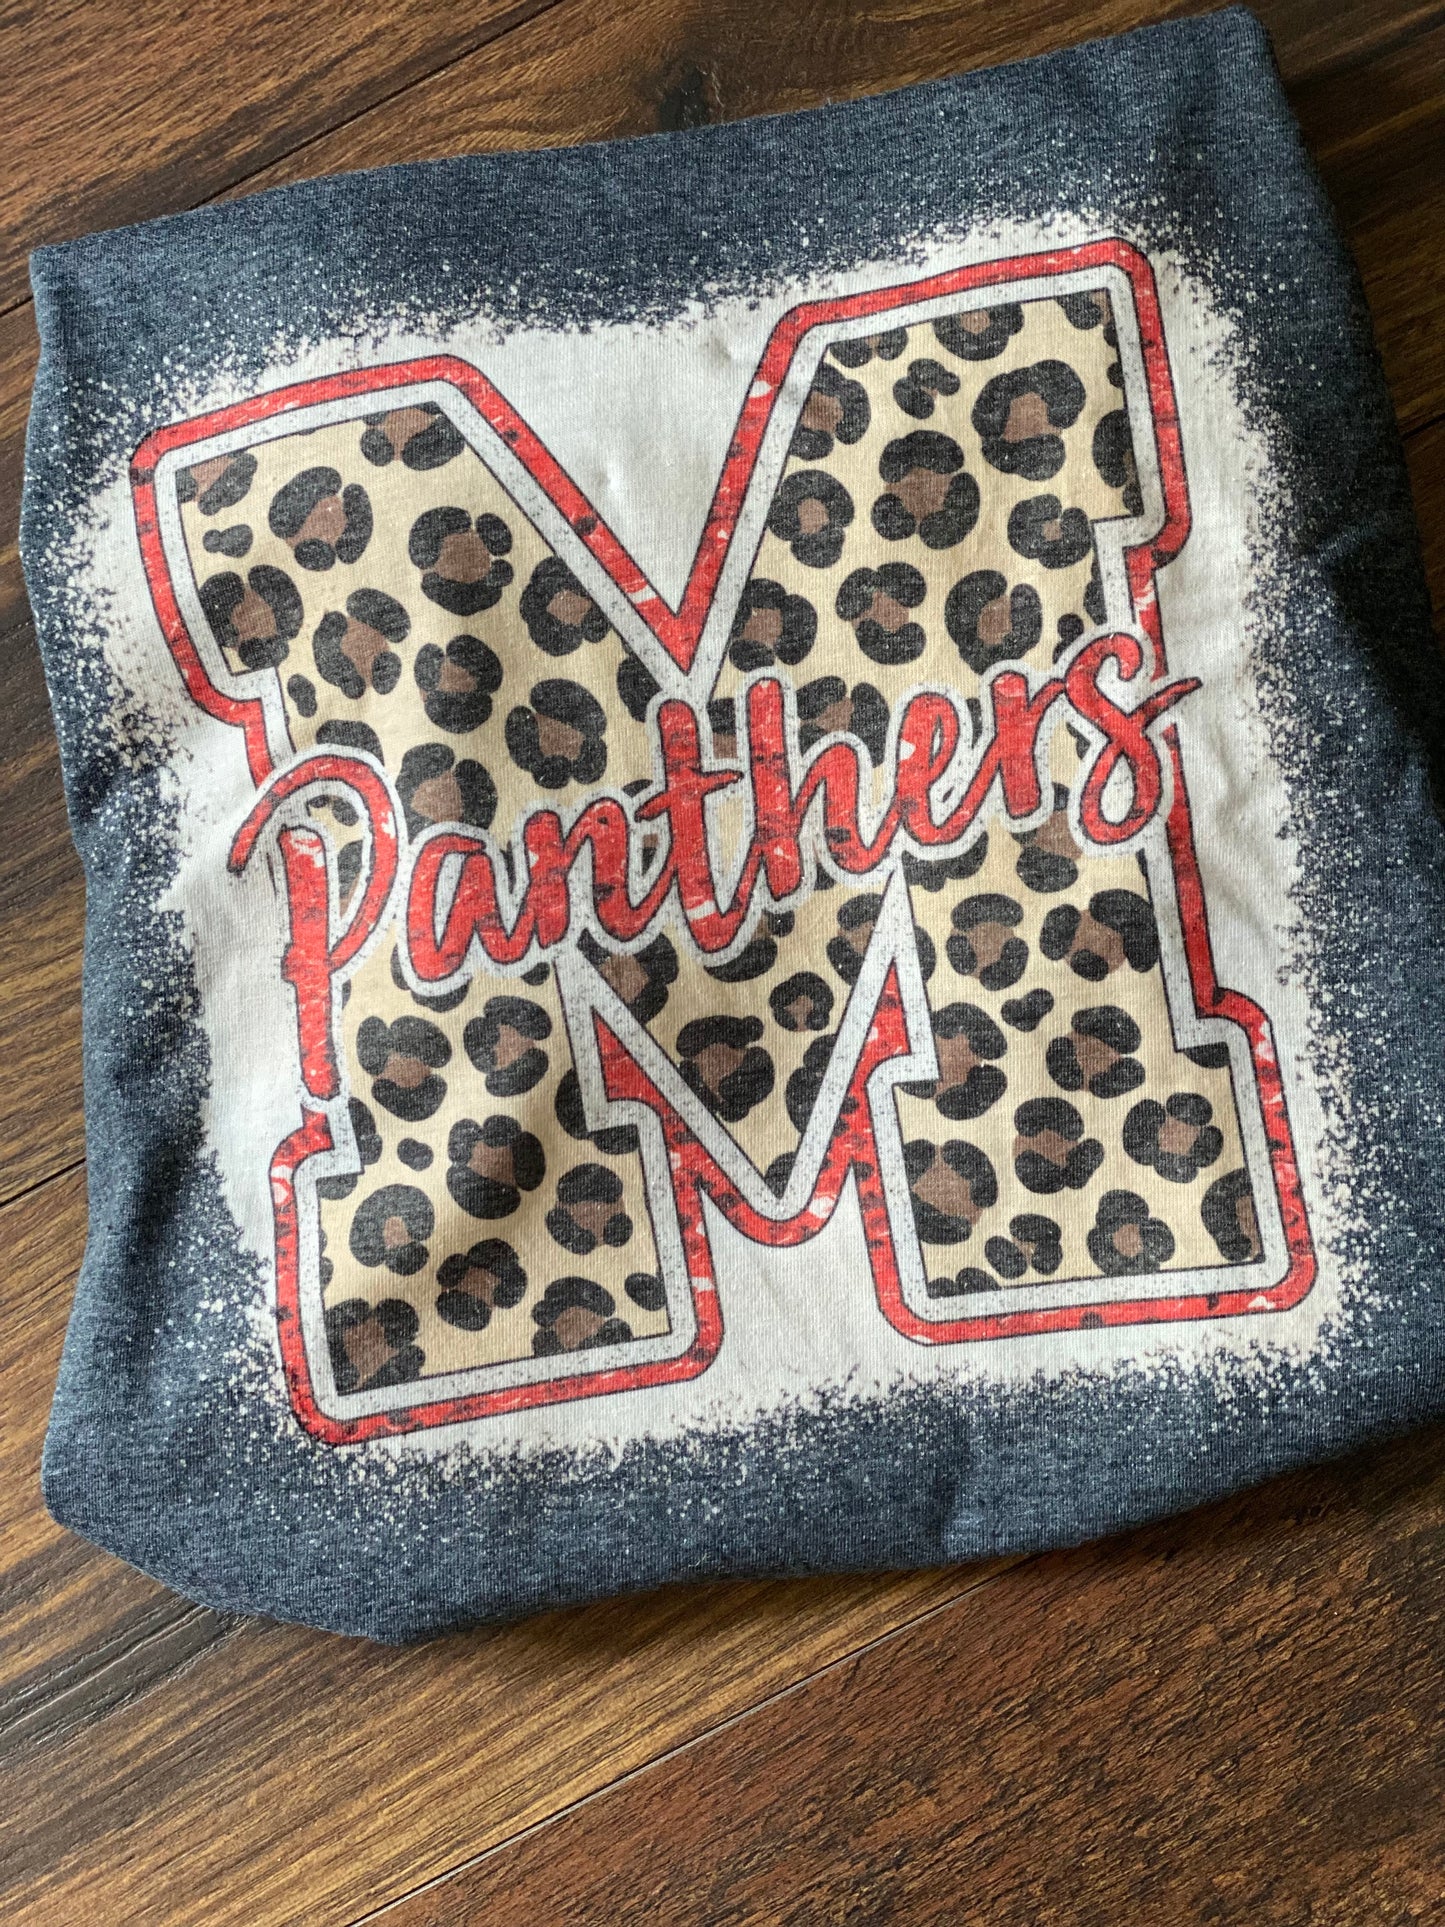 Bleached Tee Morehead Panther’s